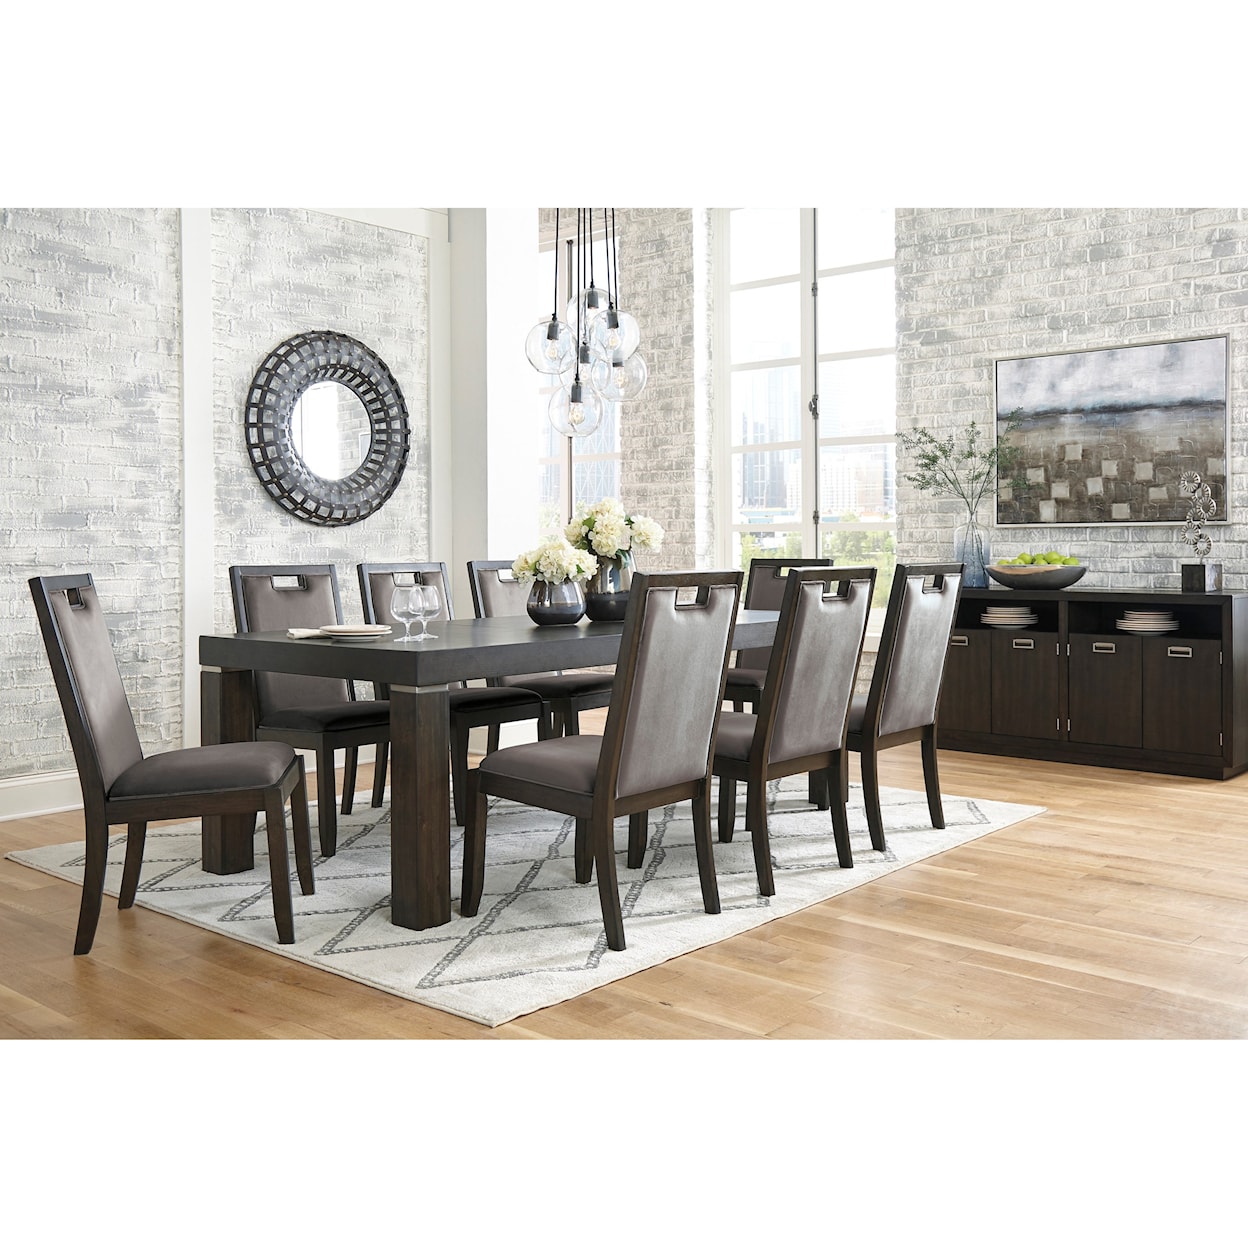 Signature Design Hyndell Rectangular Dining Room Extension Table